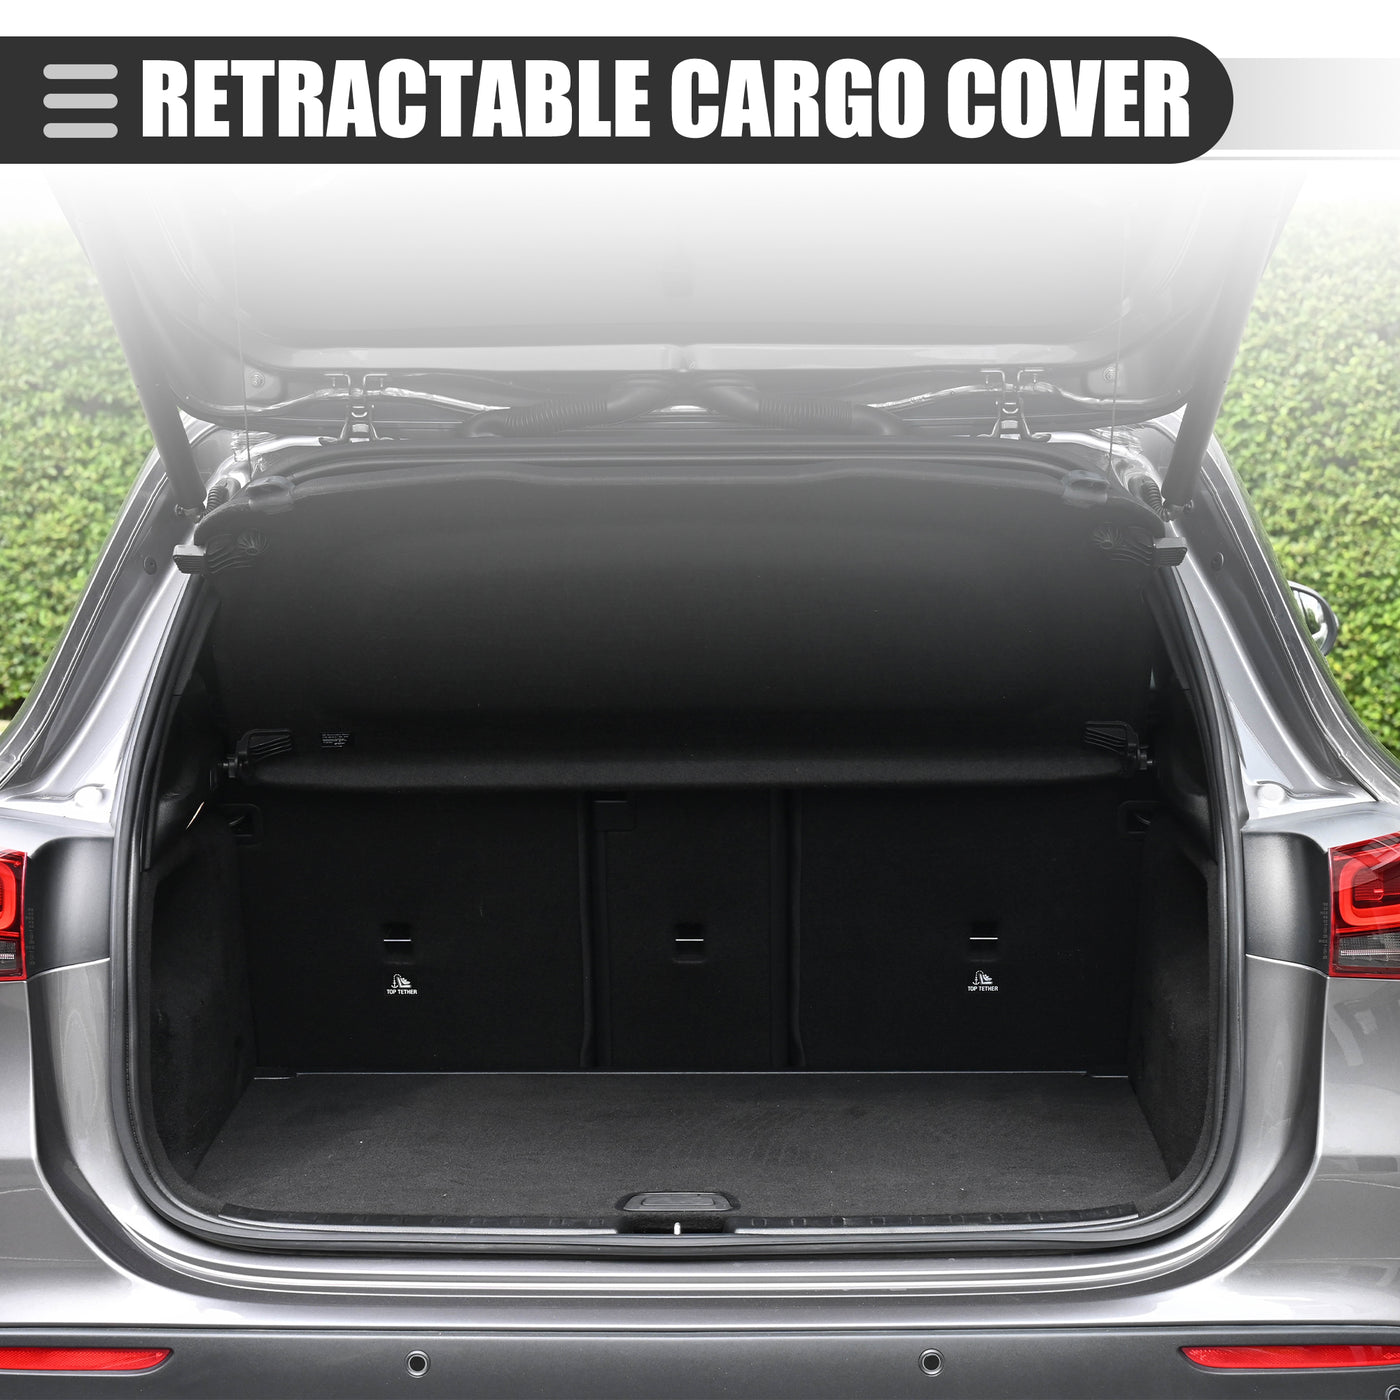 Motoforti Retractable Cargo Cover, Heat Resistant Rear Trunk Secure Cover Shield Shade, for Acura RDX 2019 2020 2021, Waterproof Canvas, Black